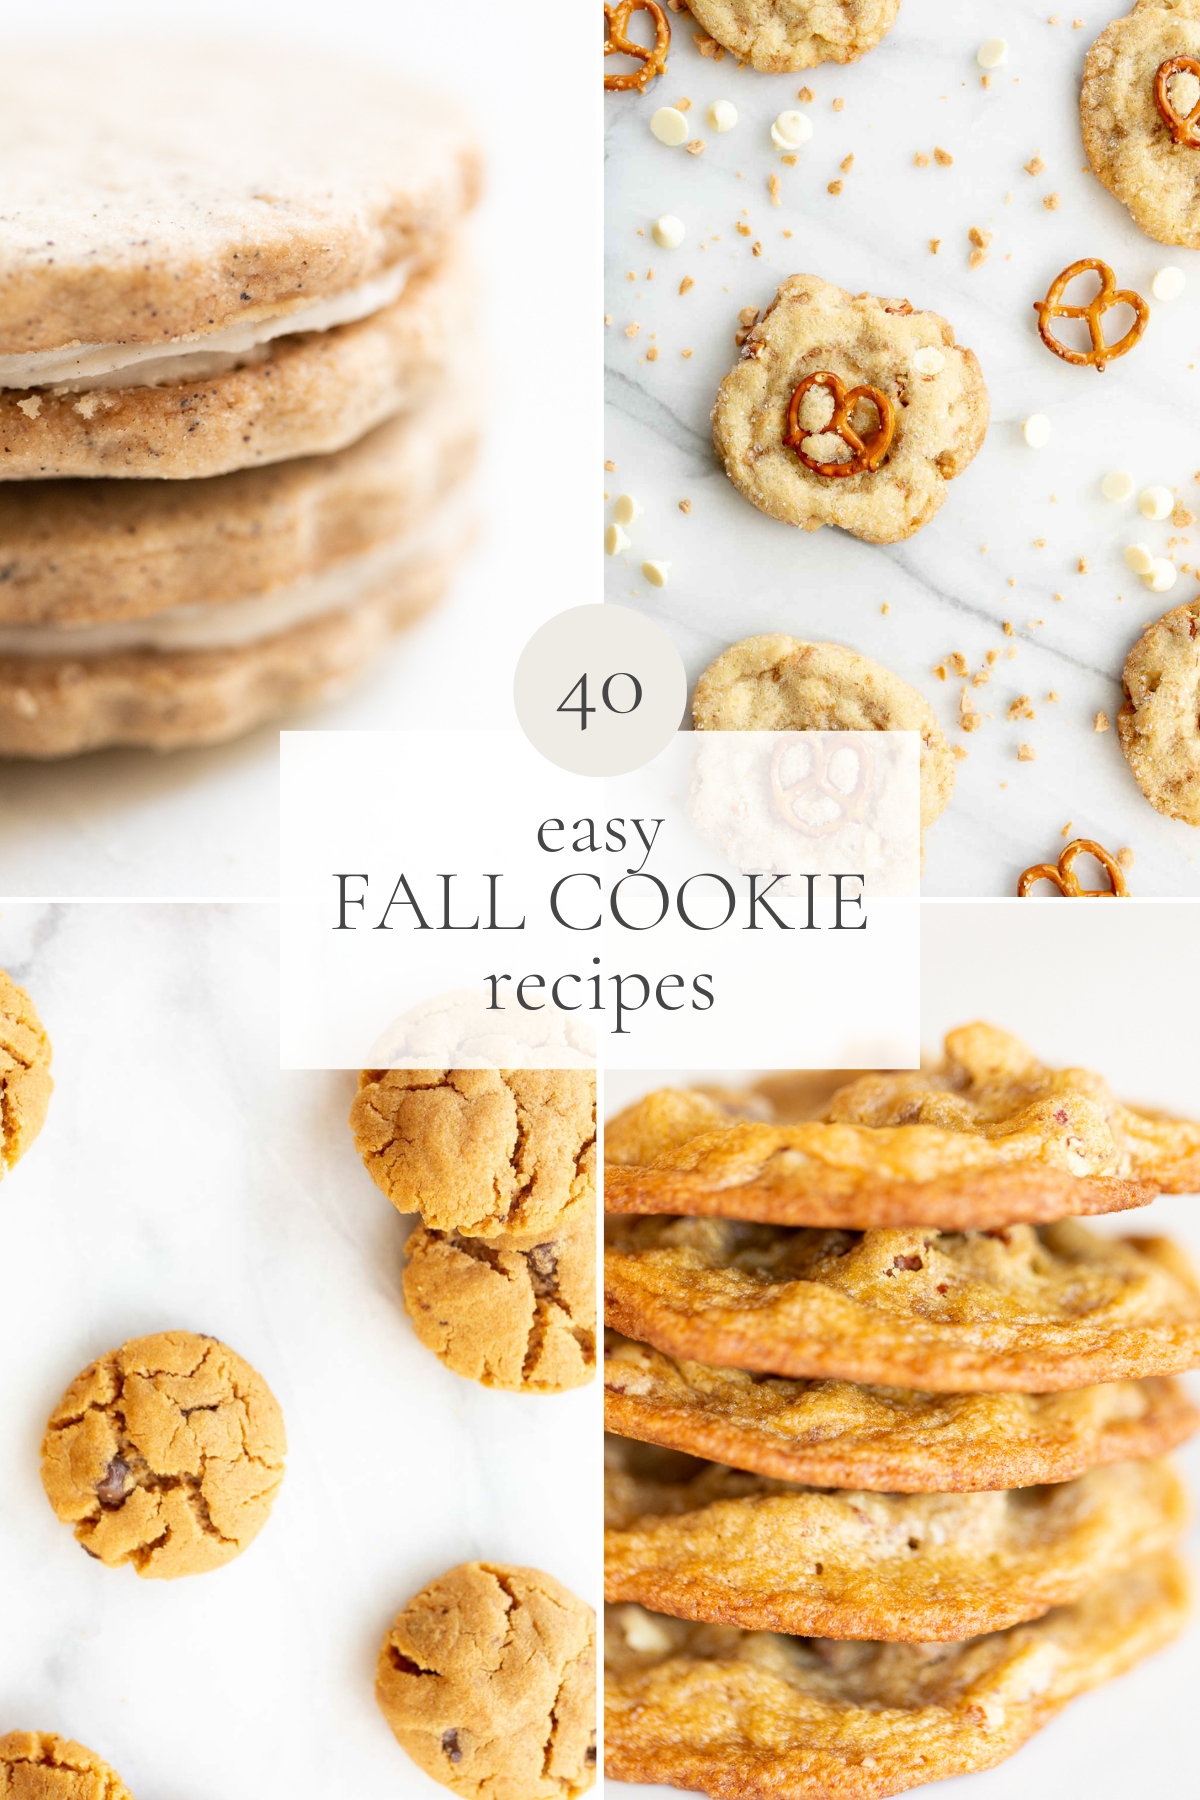 Explore a collection of 40 mouthwatering fall cookie recipes.